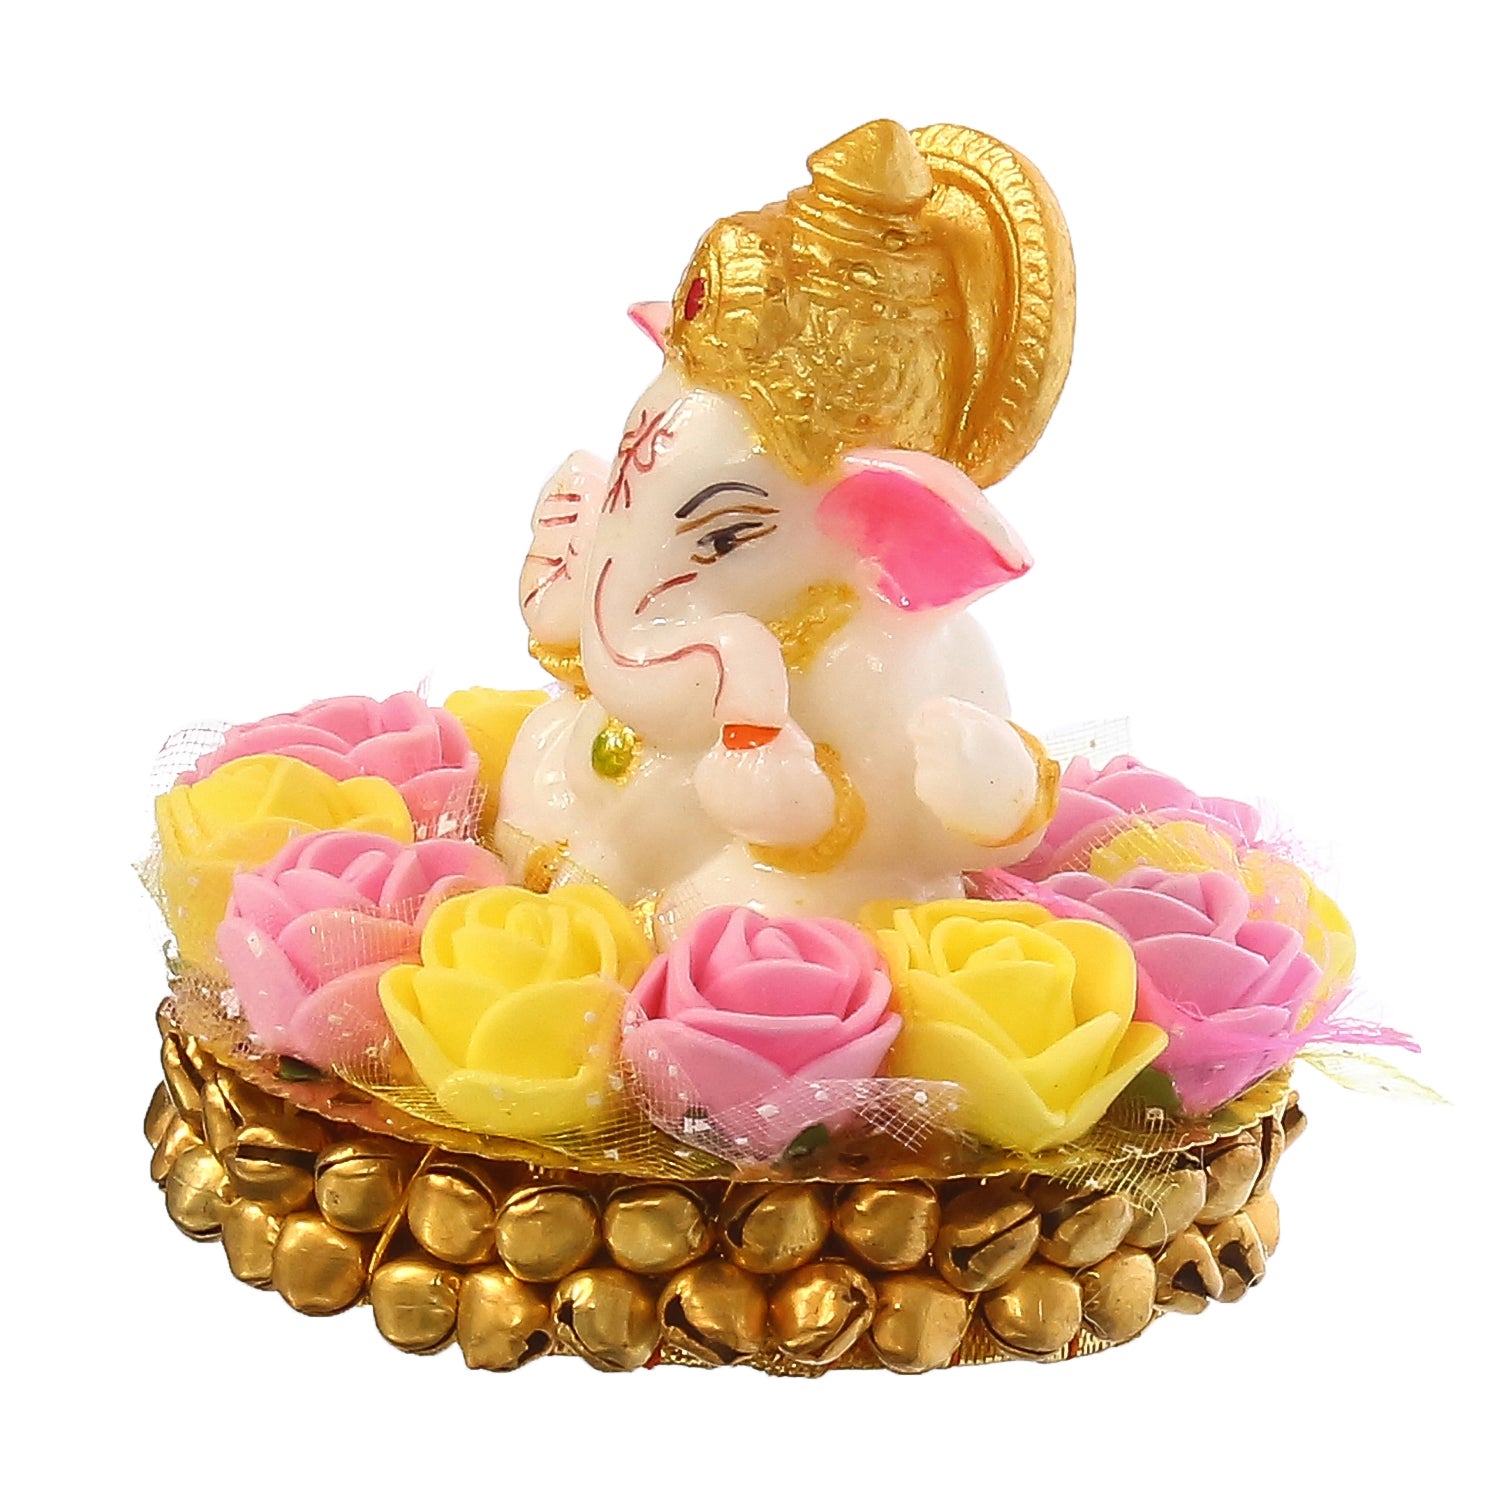 Golden and White Polyresin Lord Ganesha Idol on Decorative Handcrafted Plate with Pink and Yellow Flowers 5